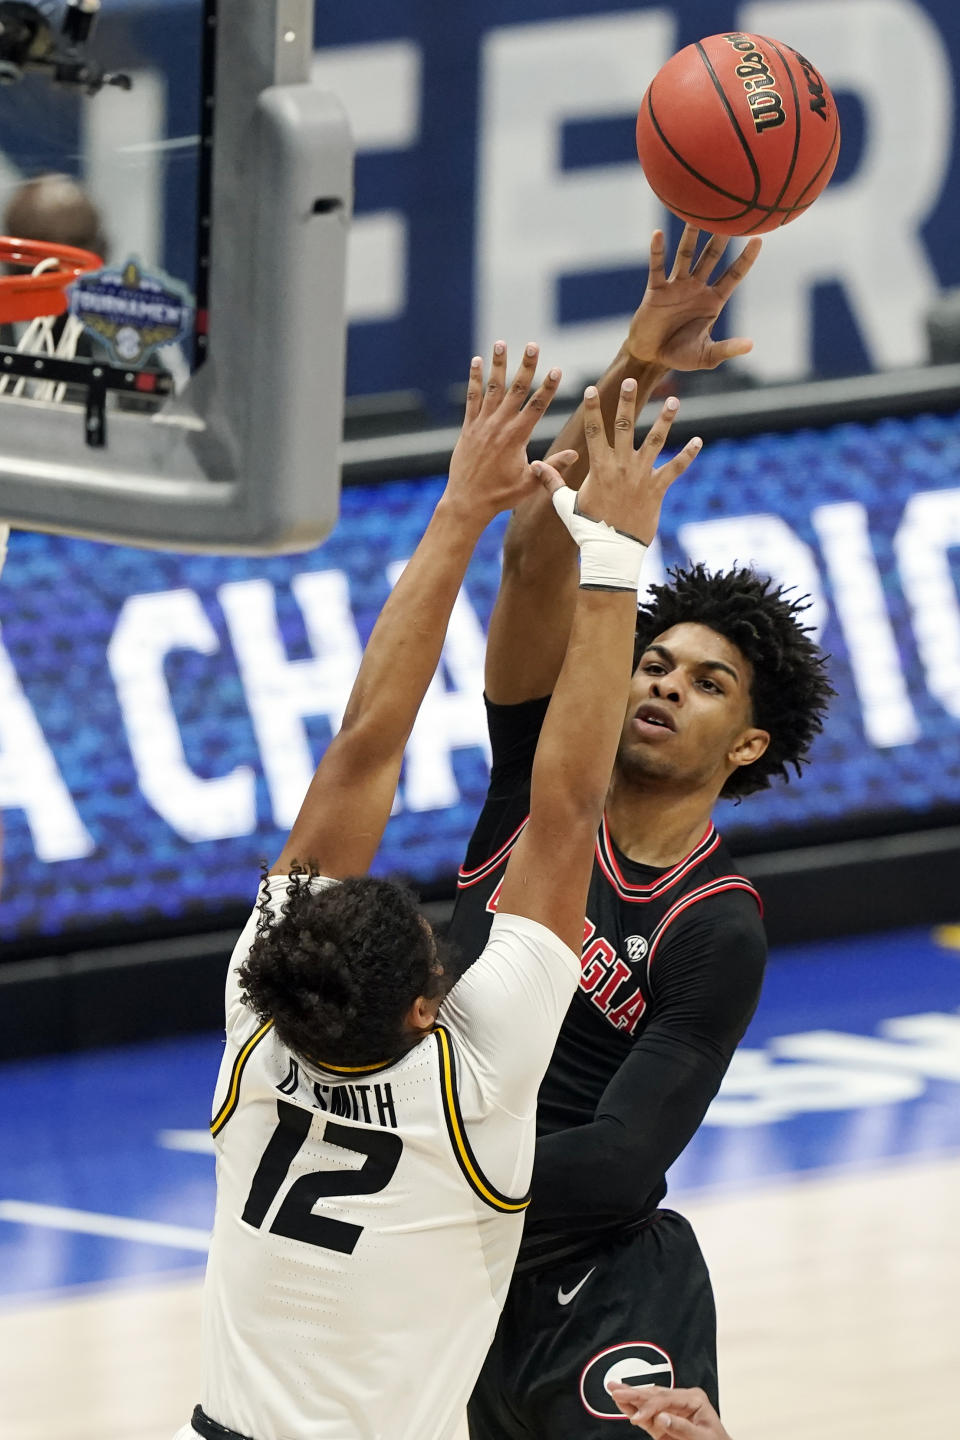 Georgia's Justin Kier shoots against Missouri's Dru Smith (12) in the first half of an NCAA college basketball game in the Southeastern Conference Tournament Thursday, March 11, 2021, in Nashville, Tenn. (AP Photo/Mark Humphrey)